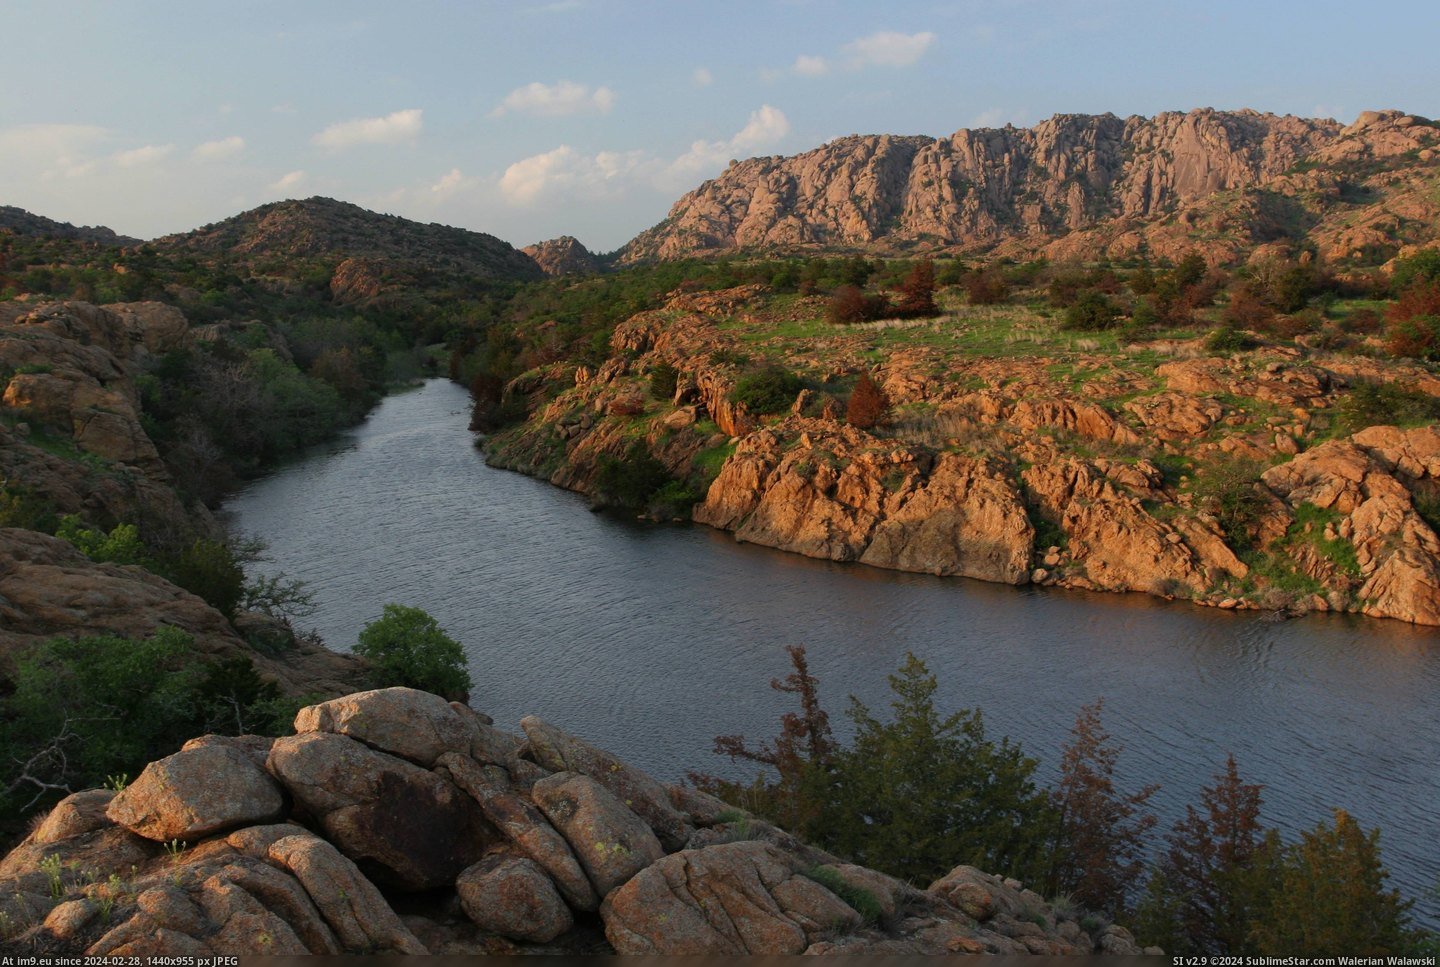 #Mountains #Underrated #Wichita #Oklahoma [Earthporn] The Novel and Underrated Wichita Mountains of Oklahoma [3504 x 2336] Pic. (Image of album My r/EARTHPORN favs))